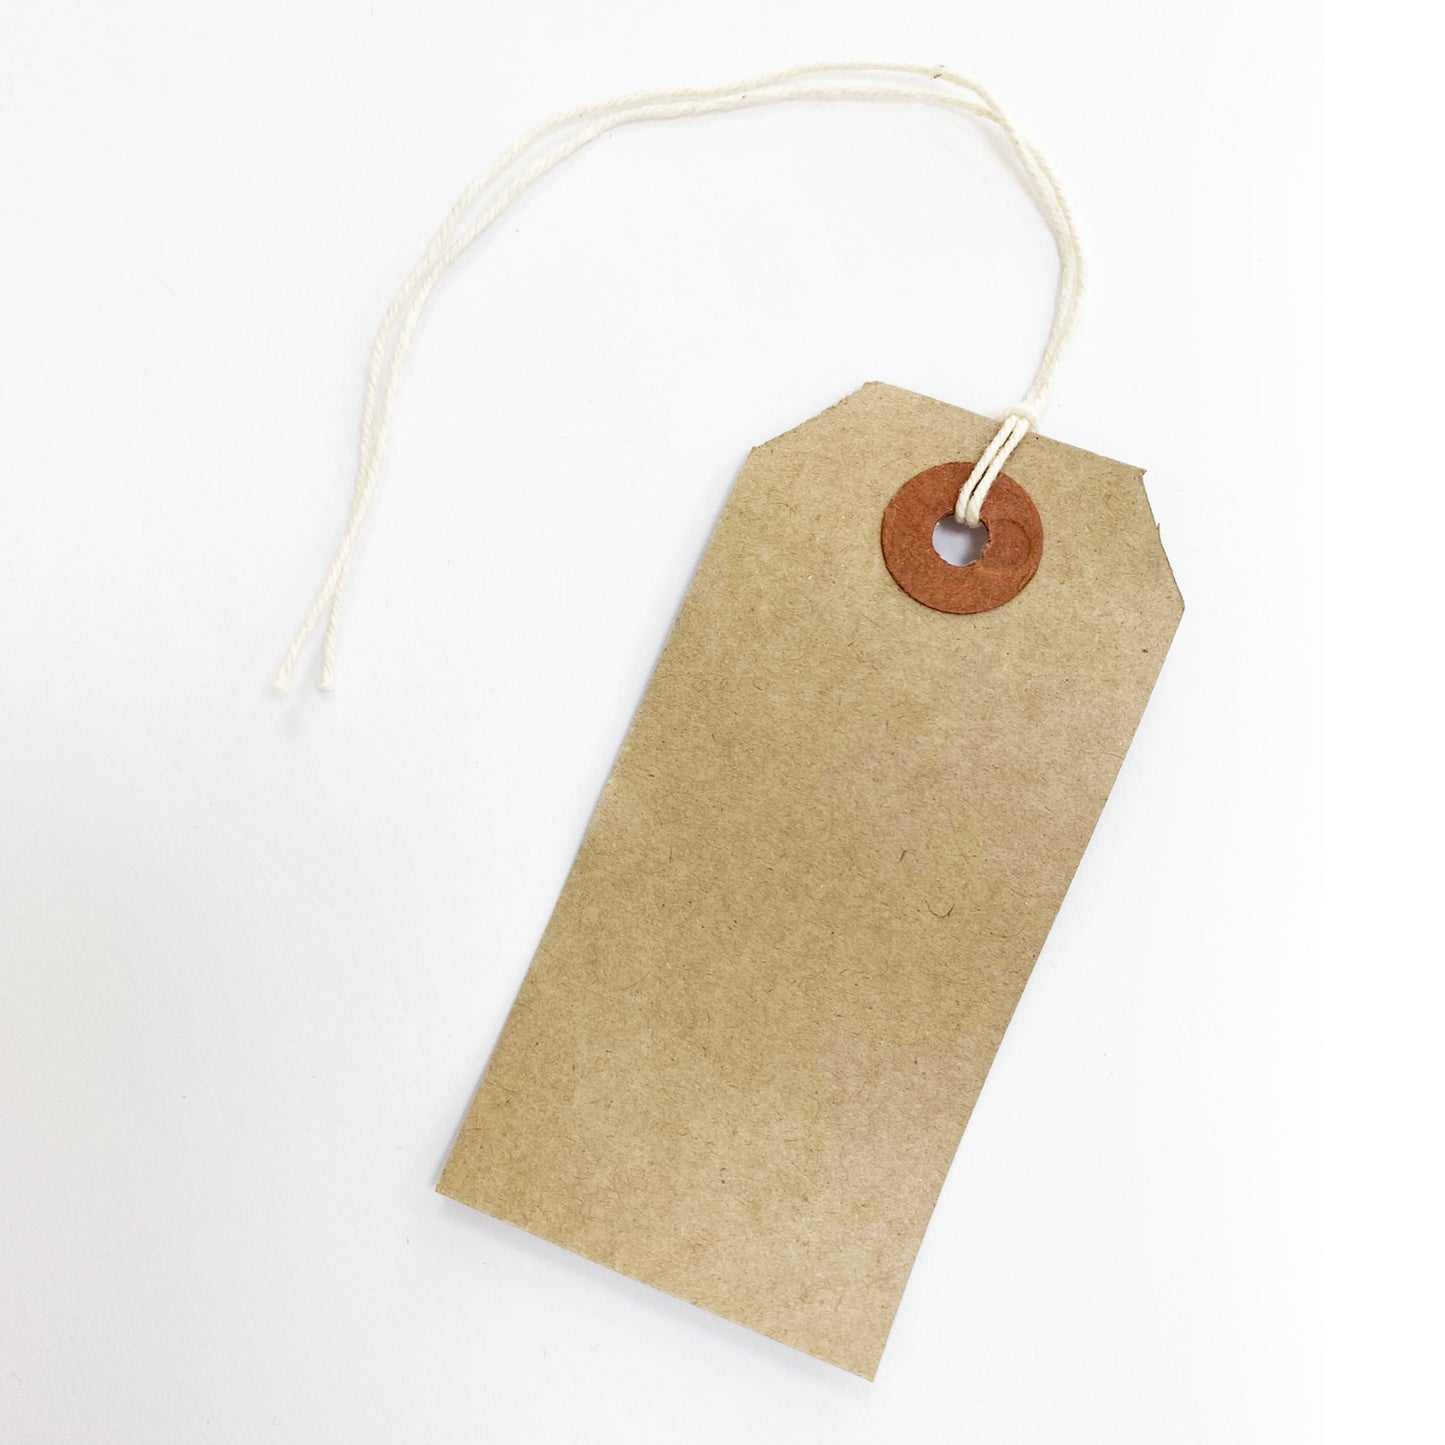 Brown Kraft Card Rustic Luggage Tags | 30 Vintage-Inspired Recycled Tag | 82mm x 41mm | Reinforced Ring Tag With String - SweetpeaStore